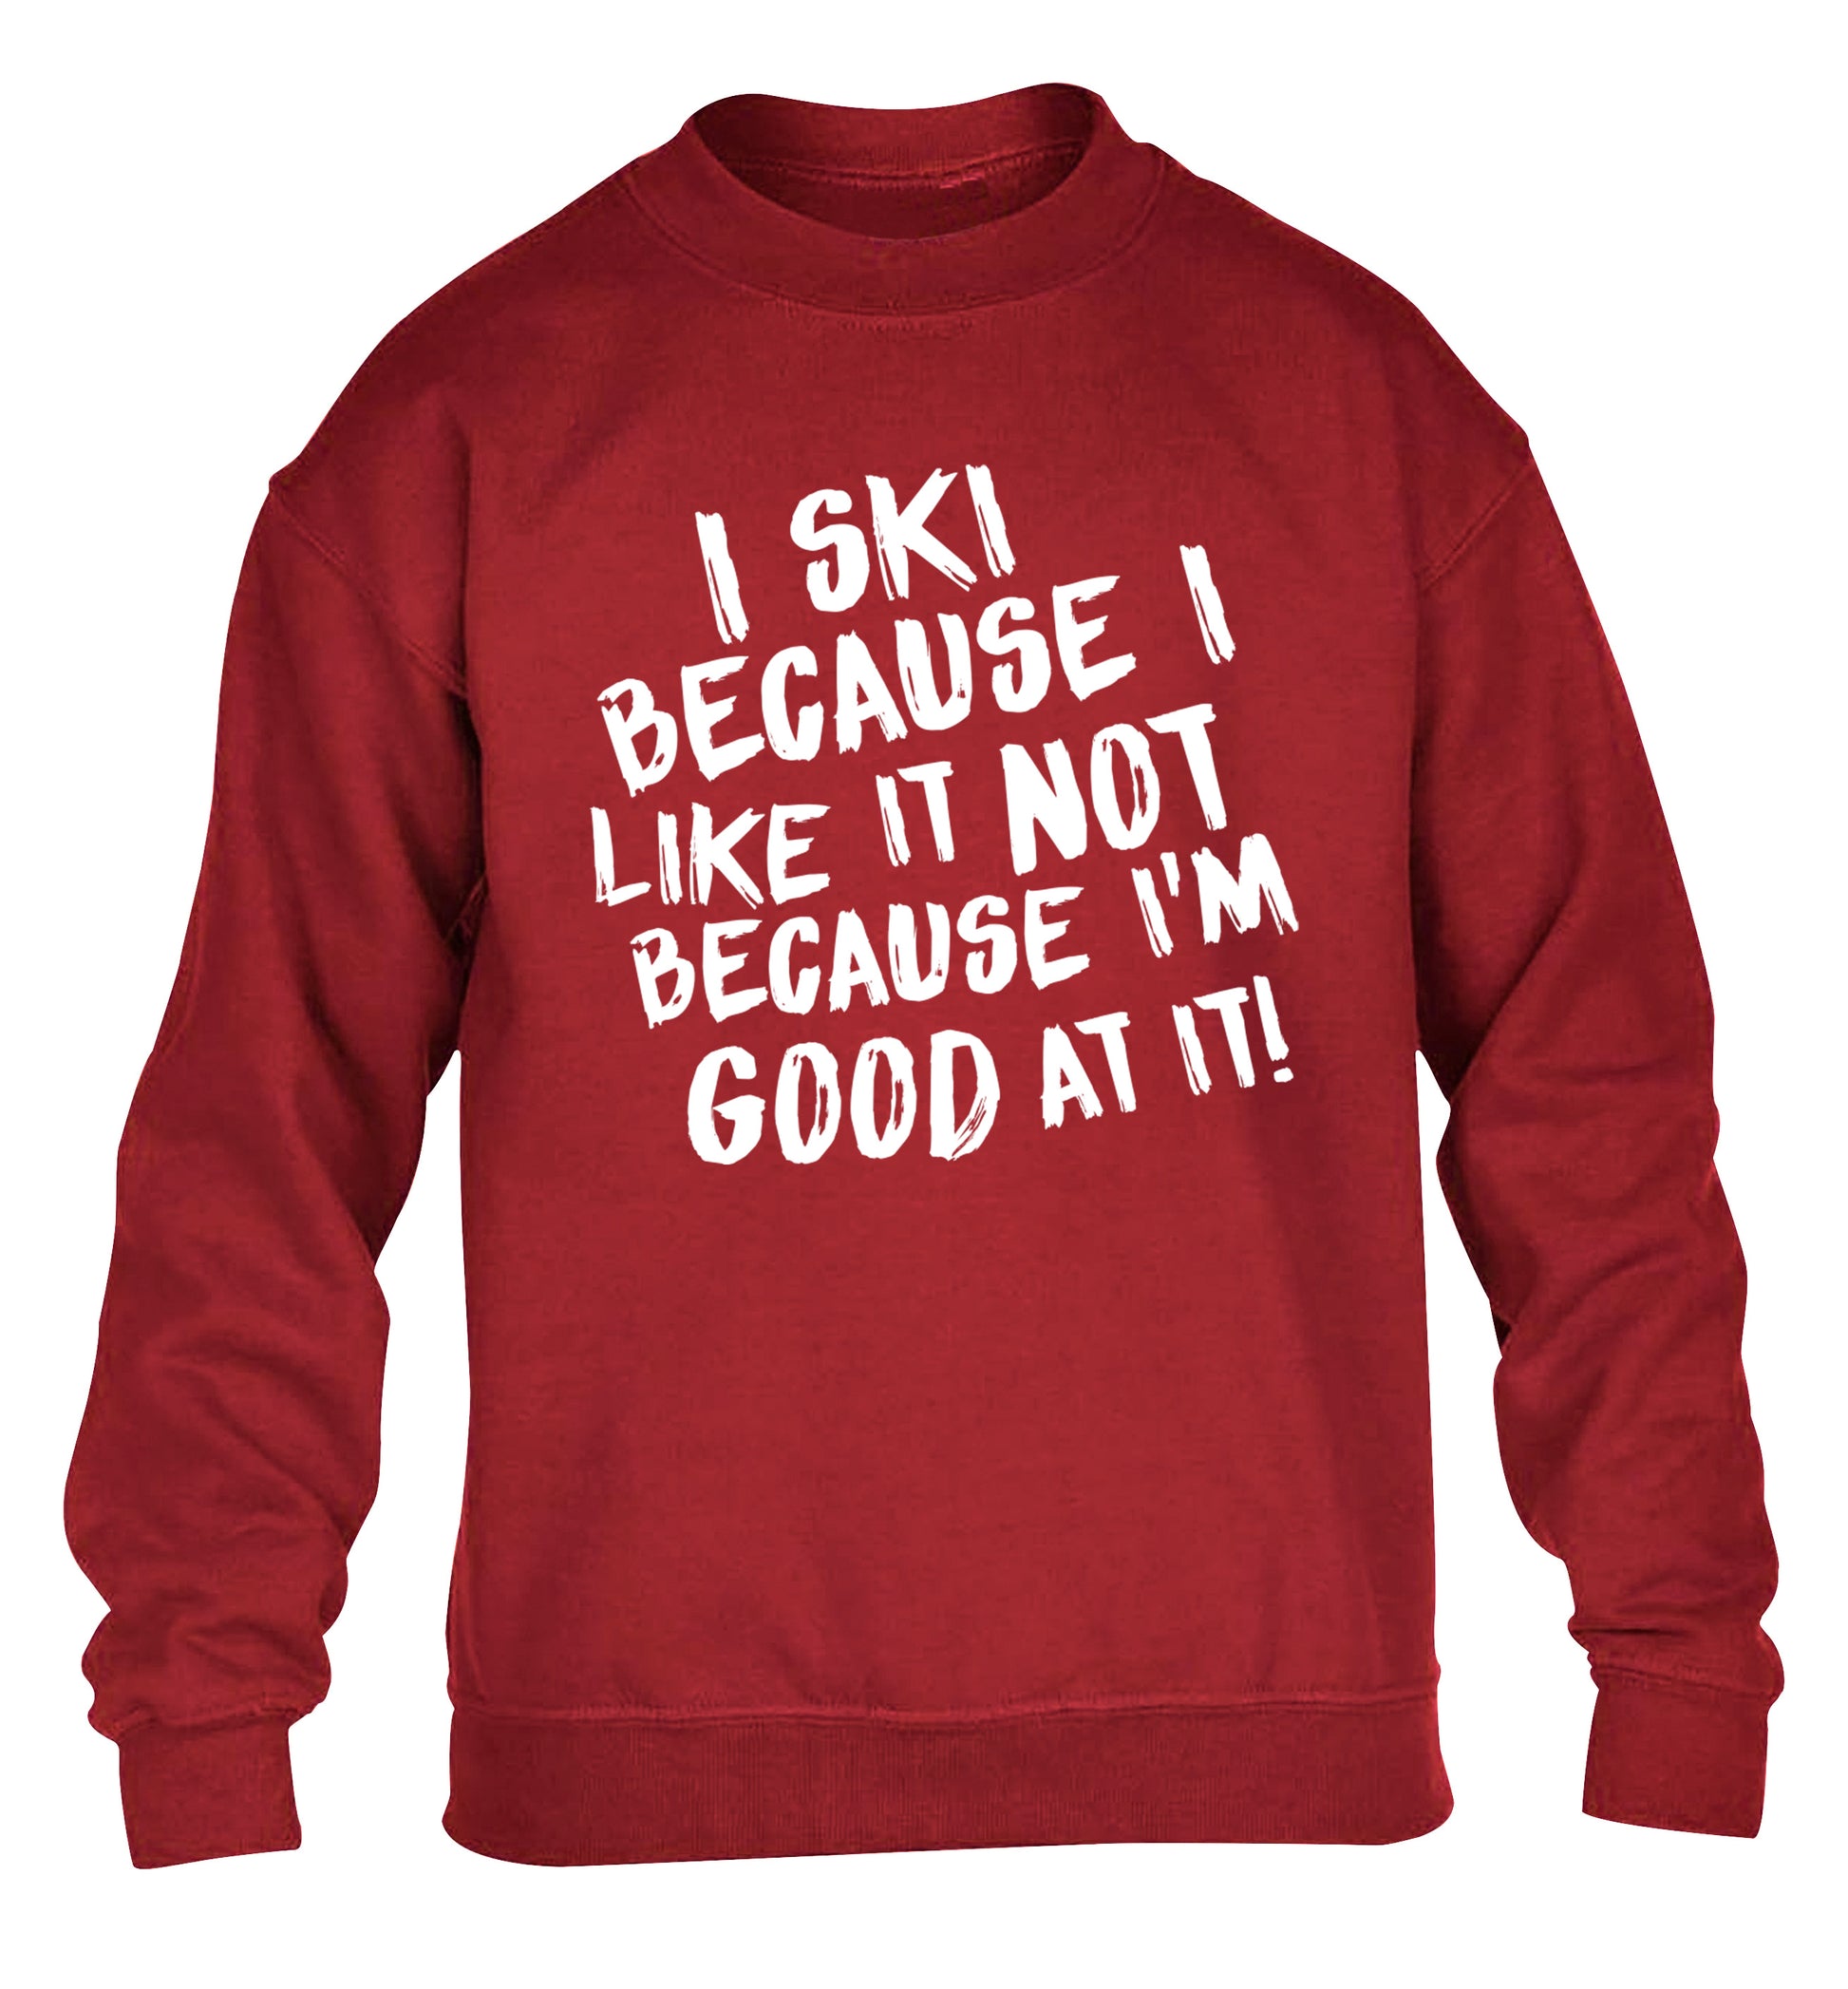 I ski because I like it not because I'm good at it children's grey sweater 12-14 Years